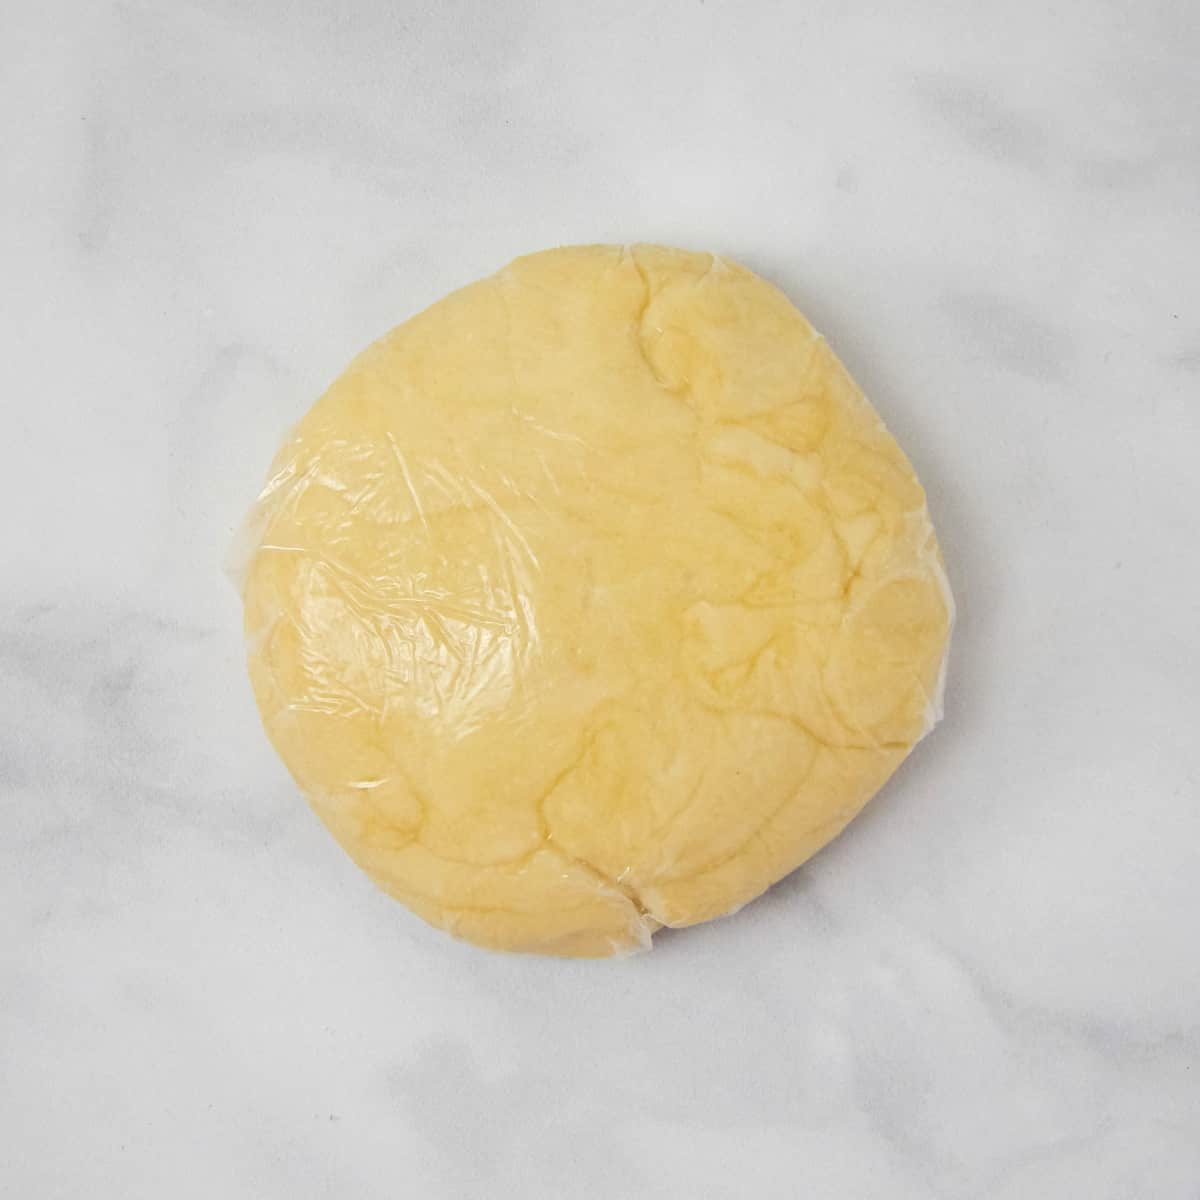 Pie crust dough disk wrapped in plastic wrap.